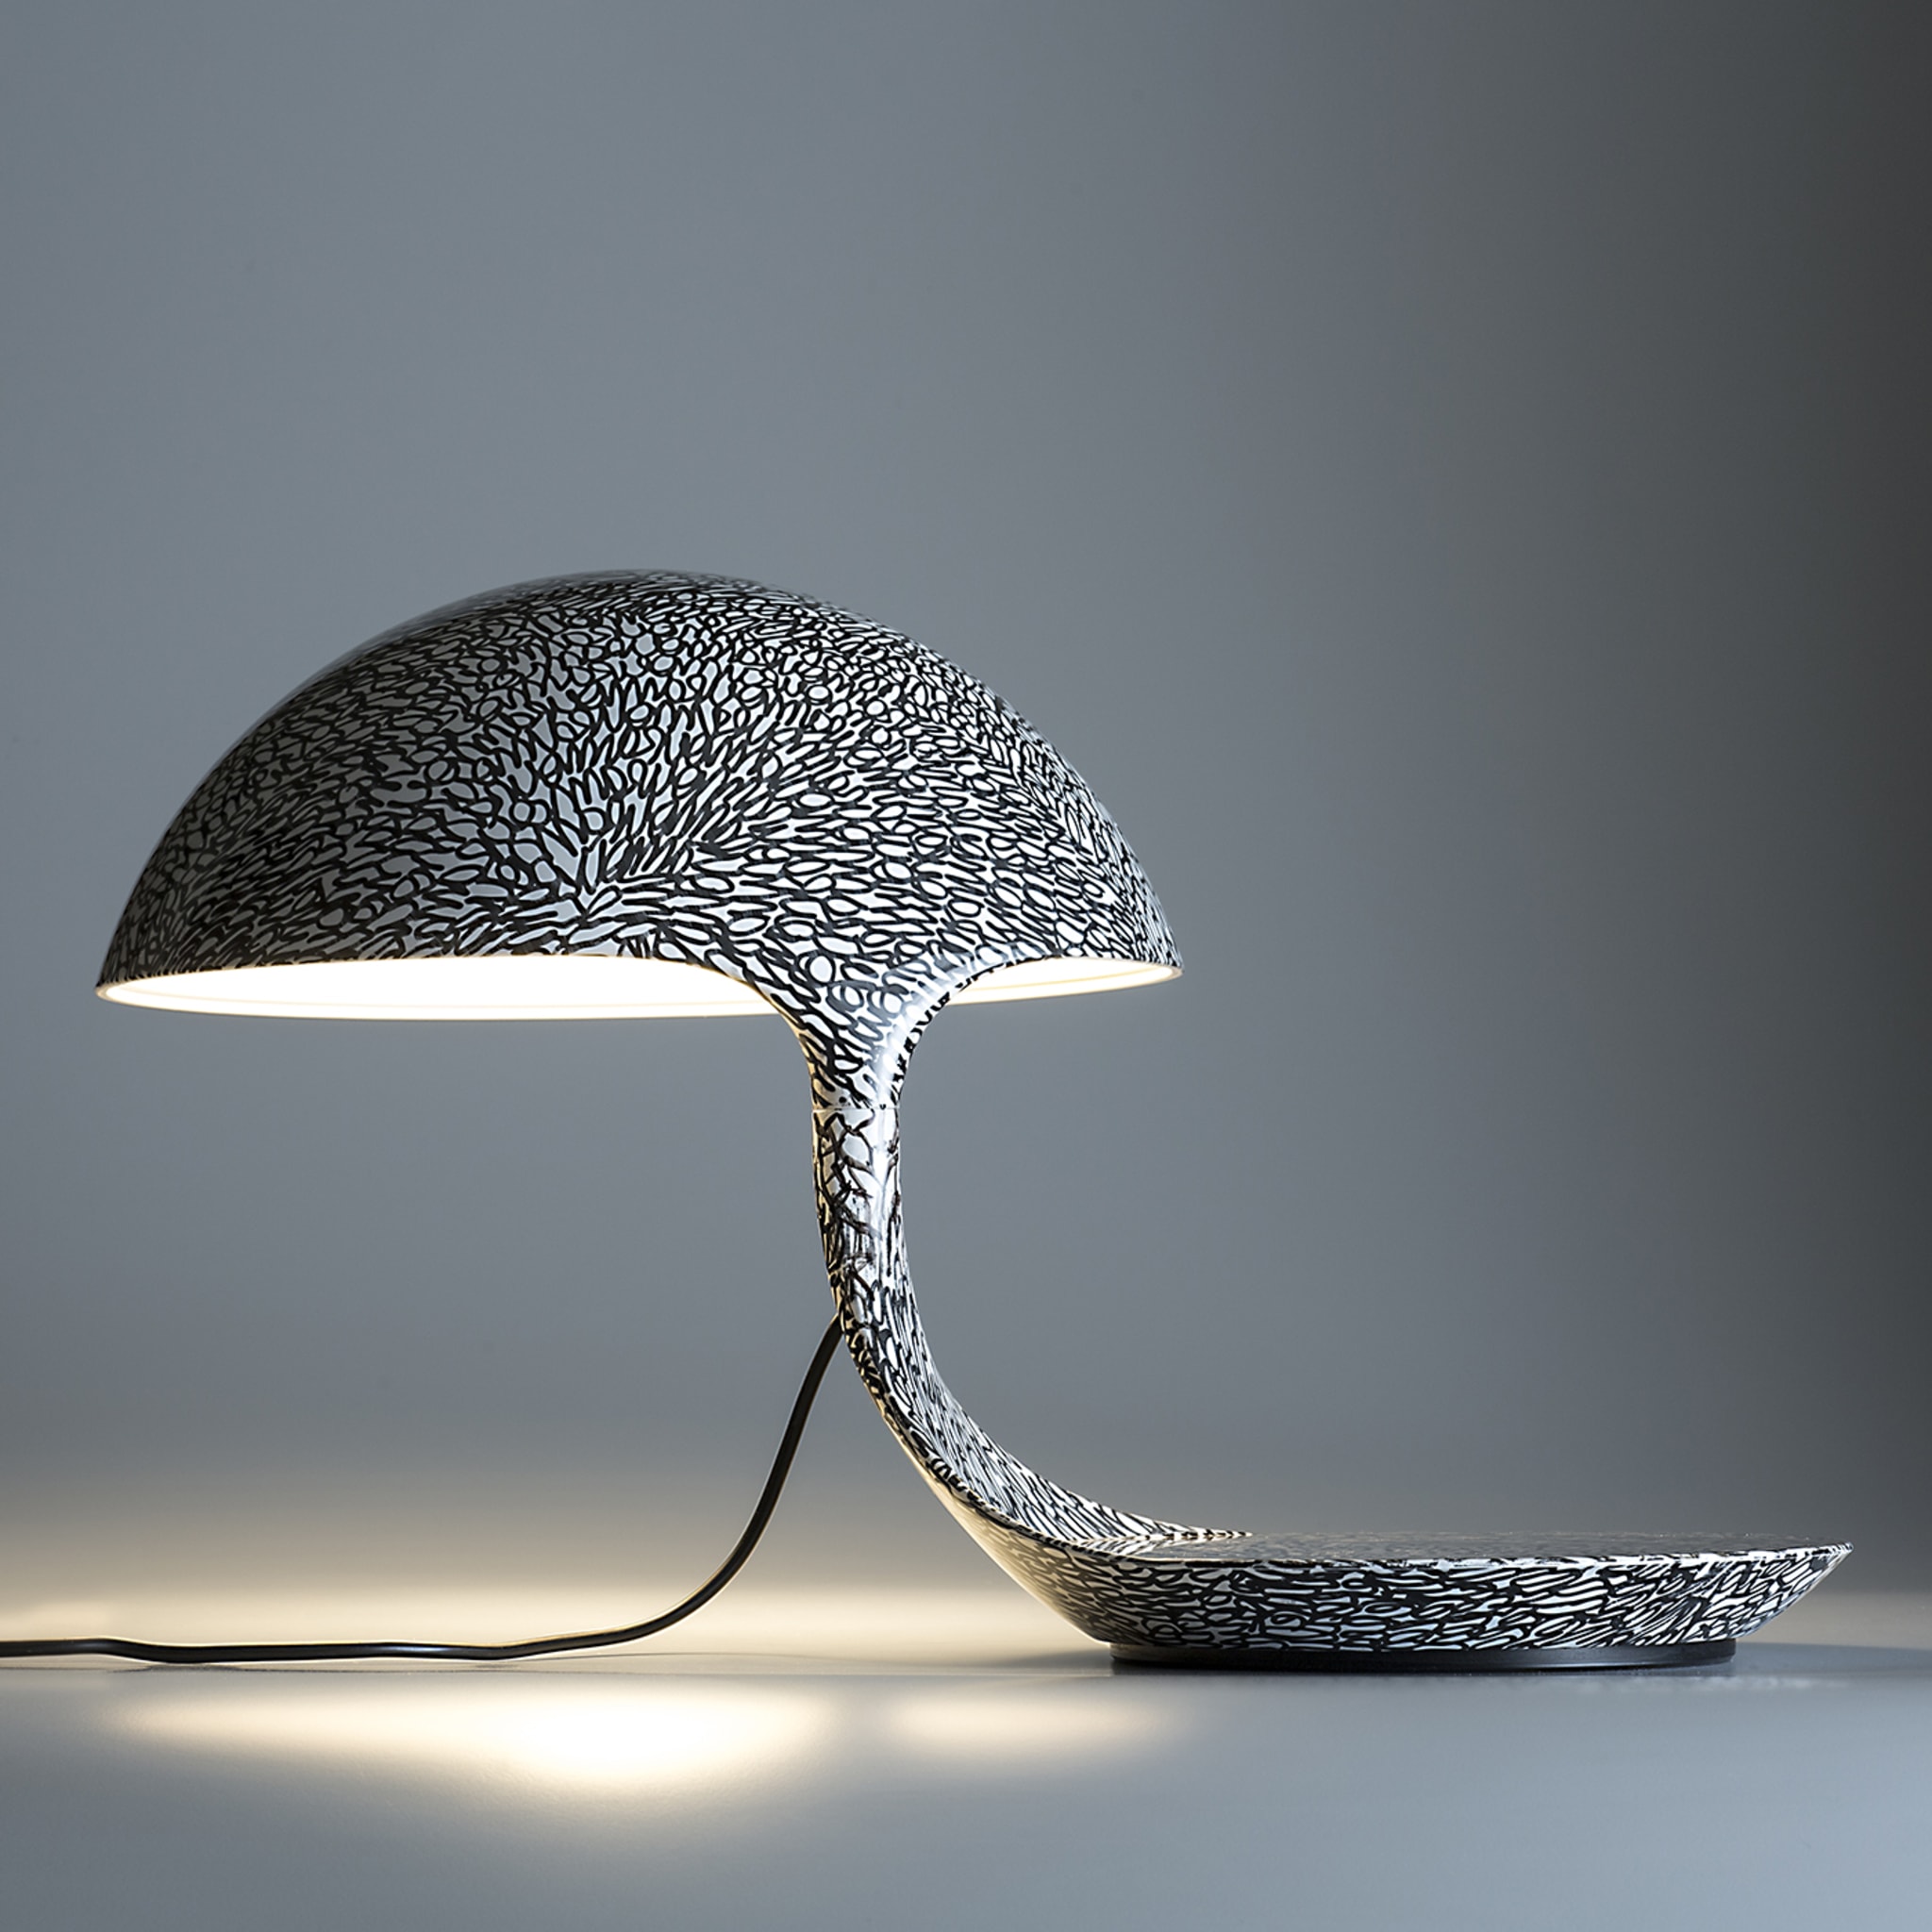 Cobra Texture Black-And-White Table Lamp by A. Femia & A. Simony - Alternative view 3